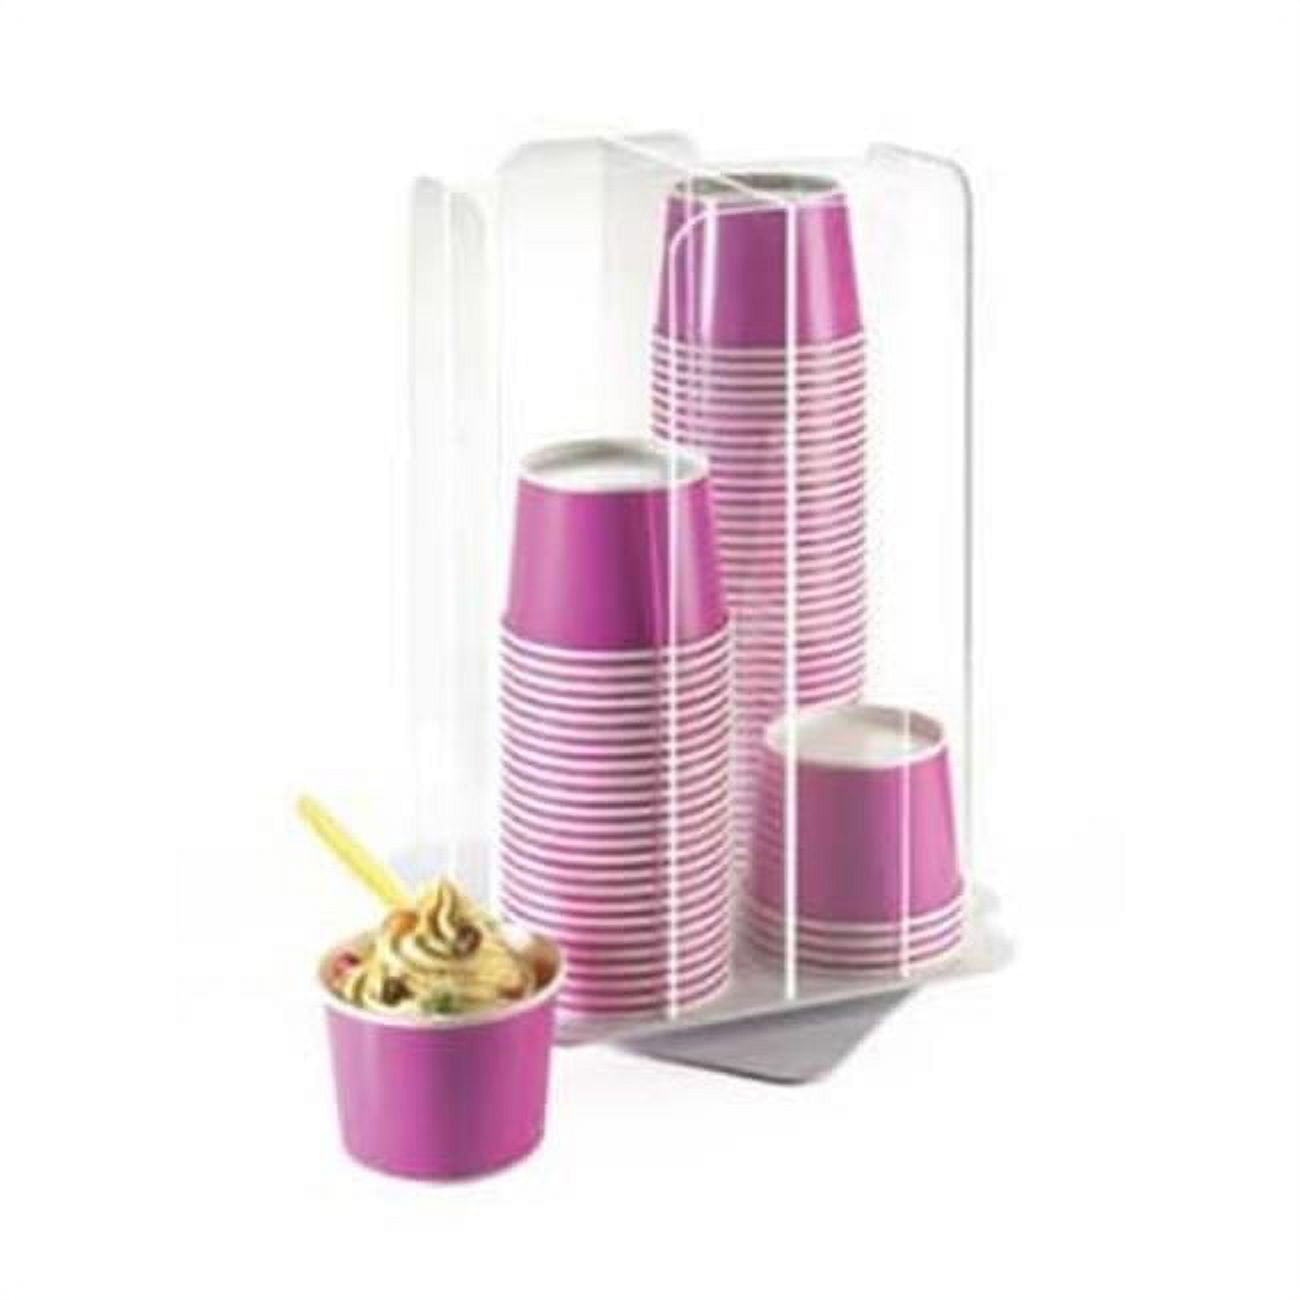 1539-12 Revolving Cup & Cereal Cup Dispenser - 10 X 10 X 16.75 In.